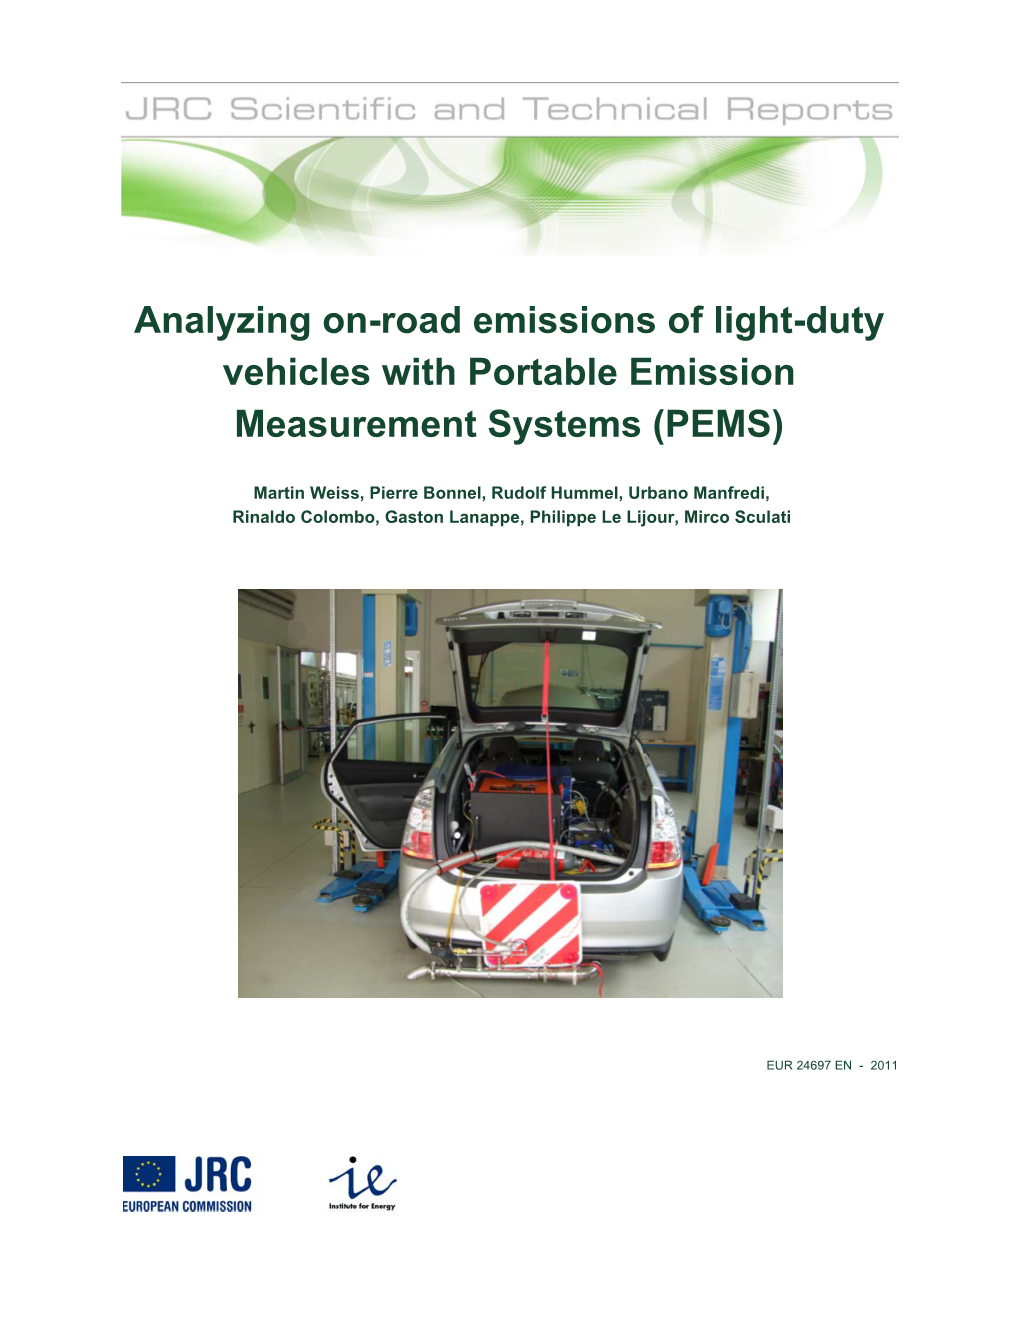 Analyzing On-Road Emissions of Light-Duty Vehicles with Portable